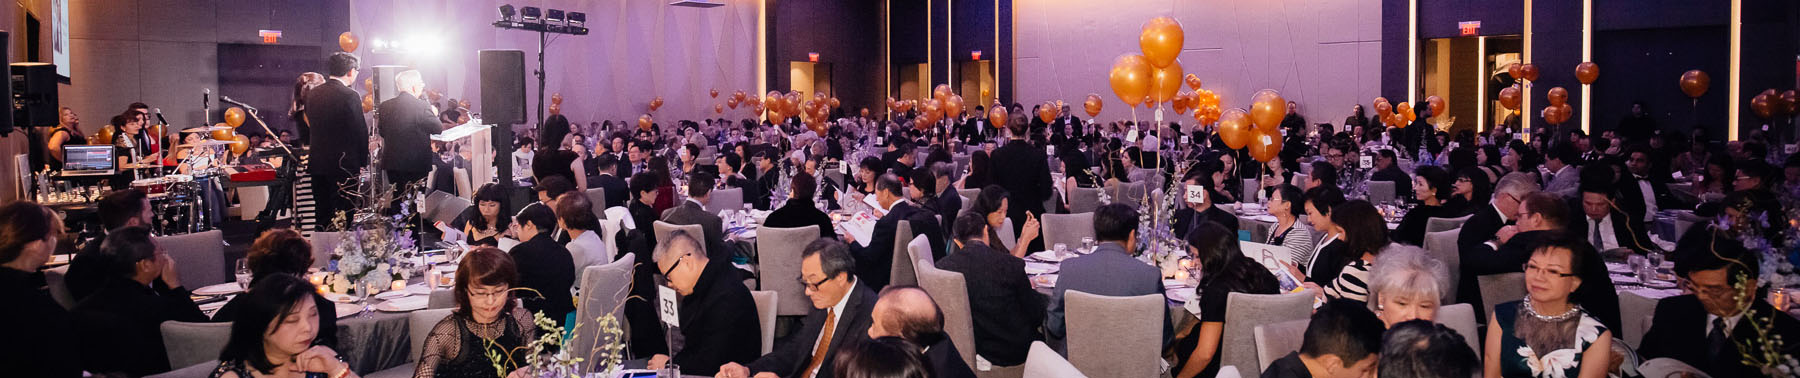 A view of the reception room of the Vancouver Gala with packed tables